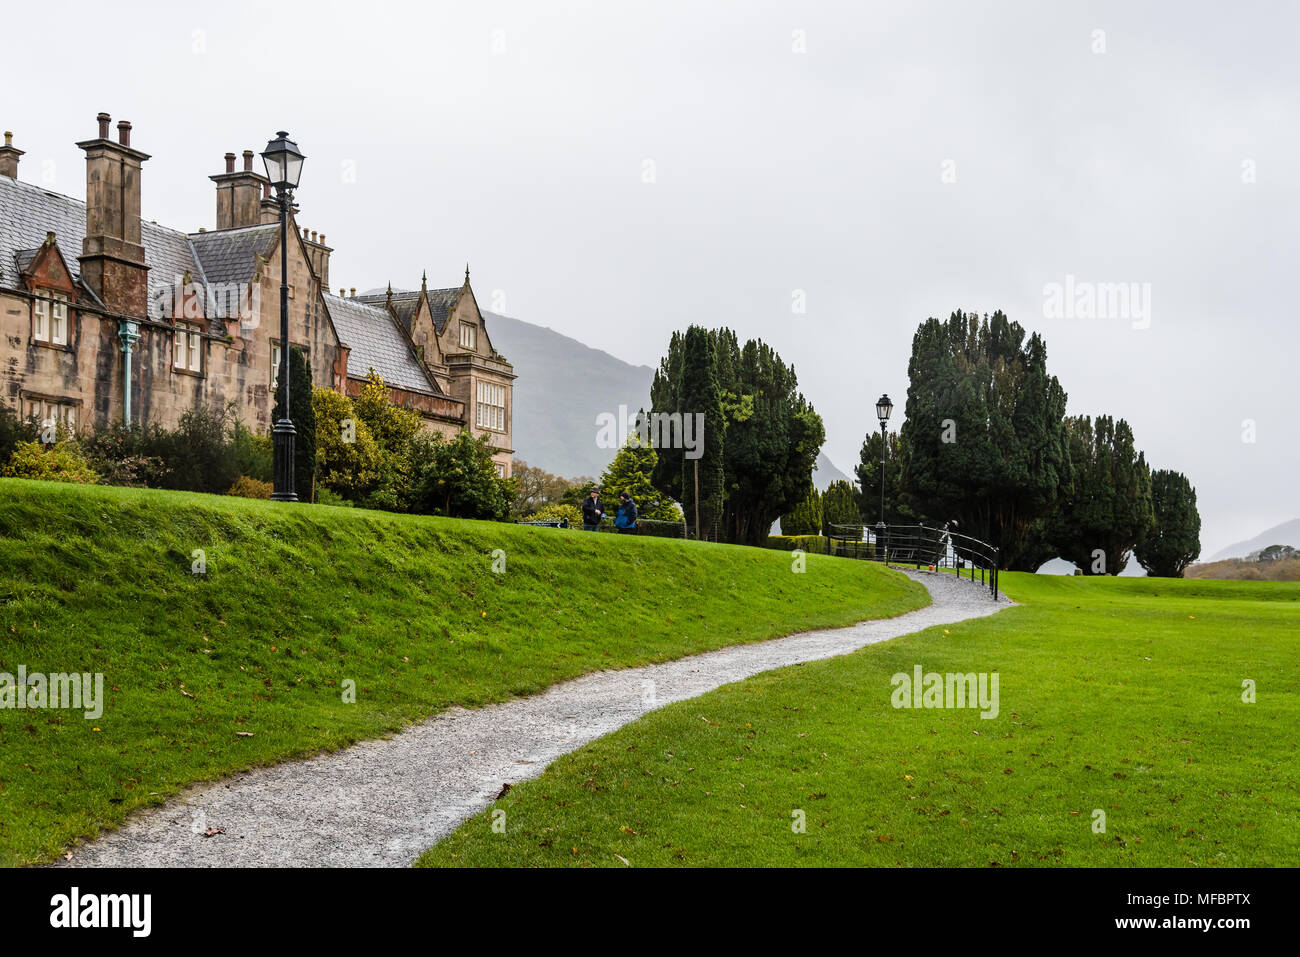 Killarney, Ireland - November 11, 2017: Muckross House and gardens against cloudy sky. It is a mansion designed in Tudor style, located in the The Nat Stock Photo